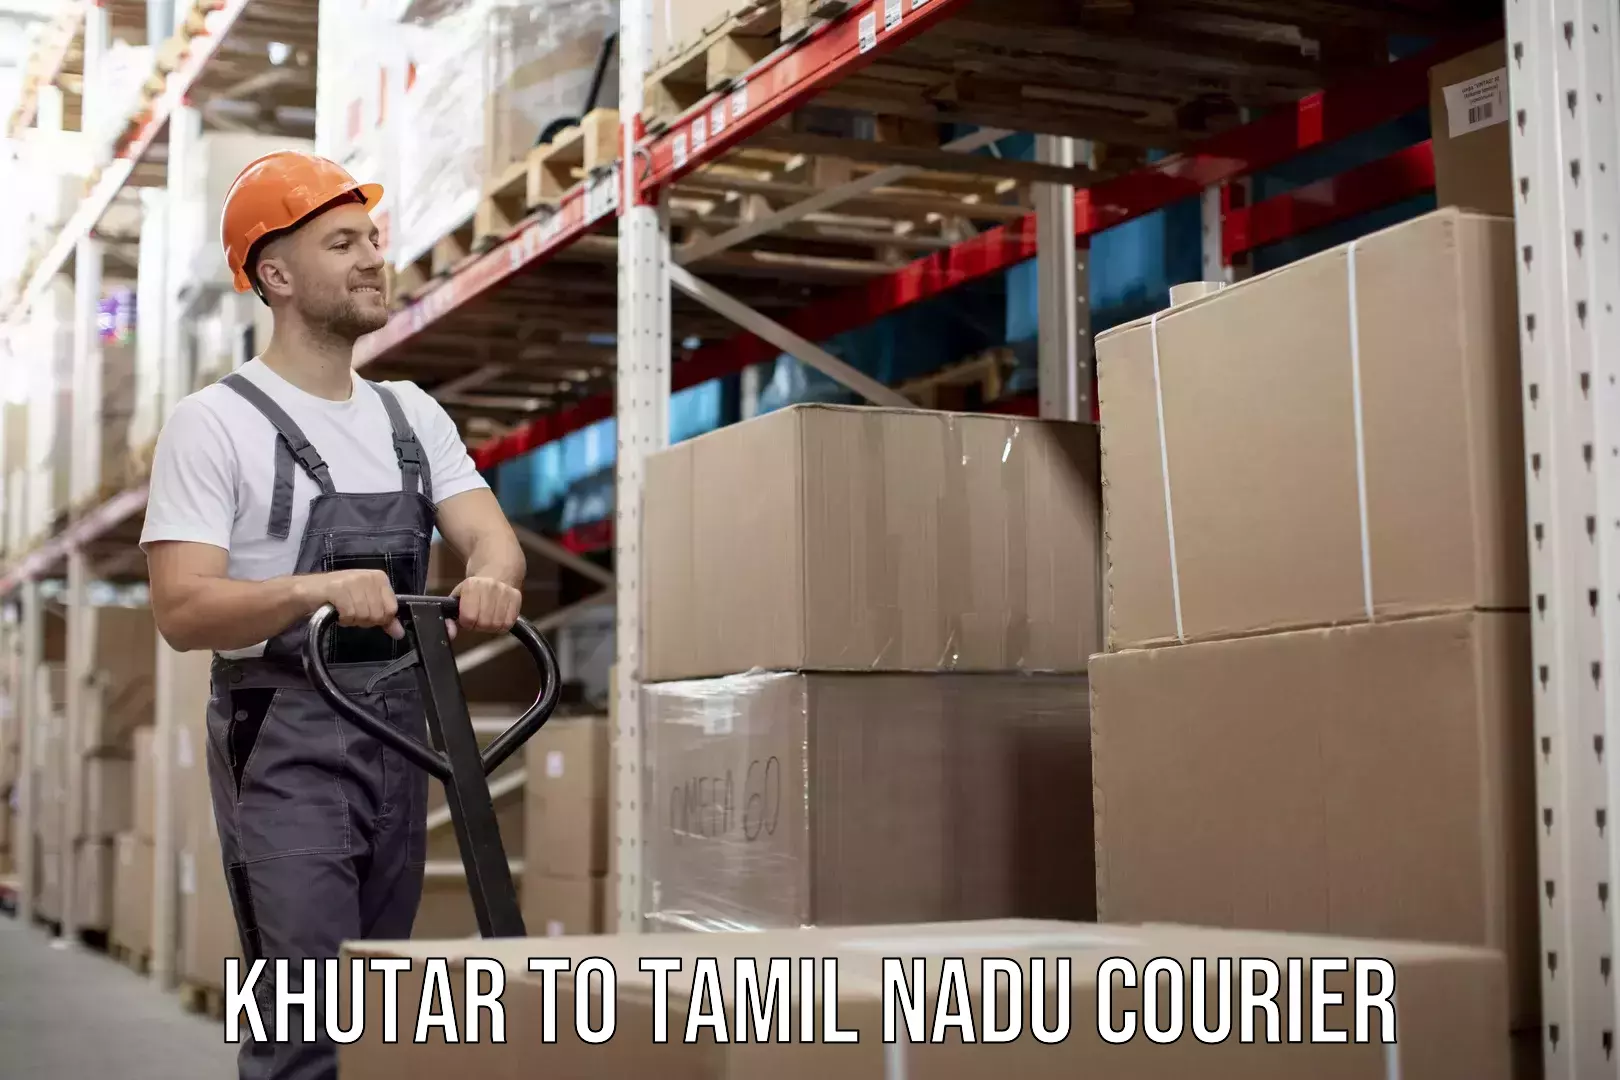 Moving and packing experts Khutar to Tamil Nadu